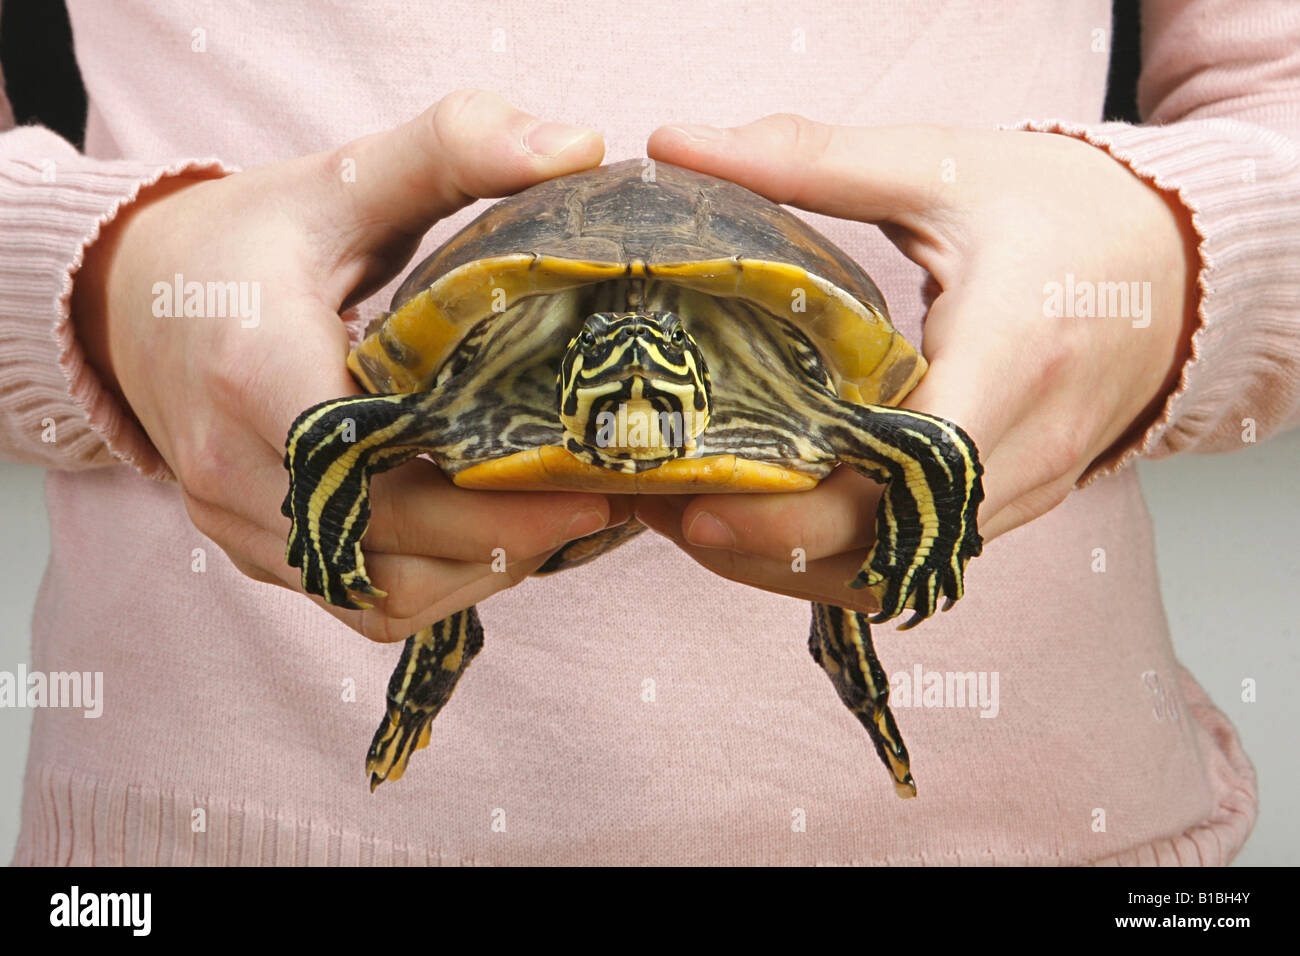 human with Florida Redbelly Turtle / Pseudemys nelsoni Stock Photo